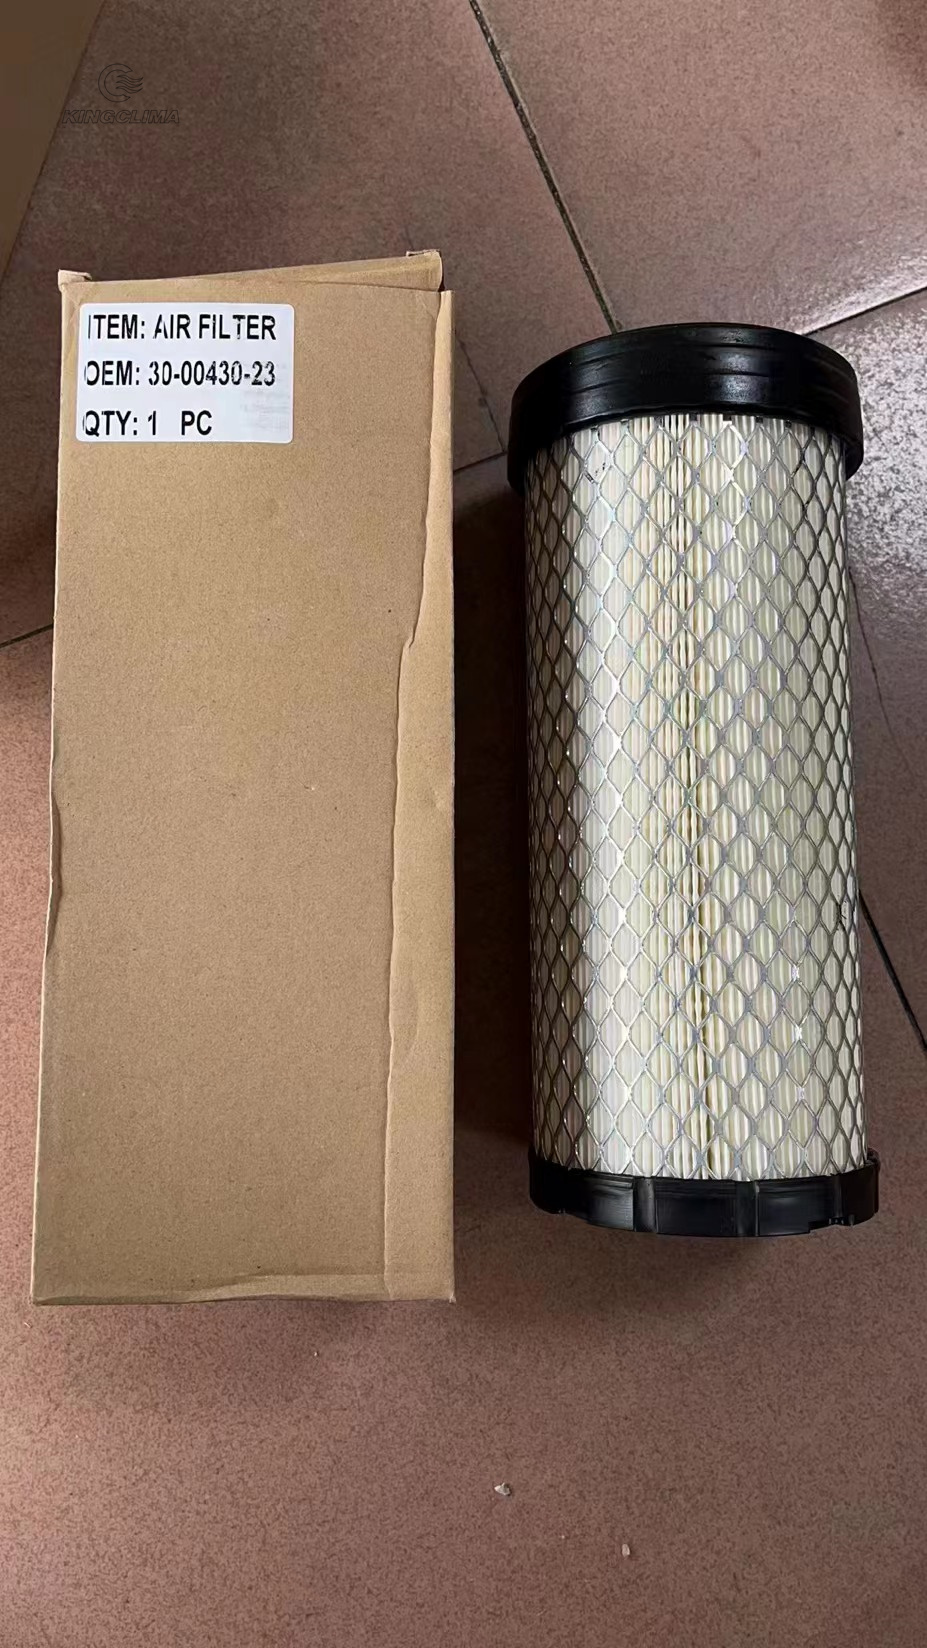 30-00430-23 Carrier air filter parts for Carrier refrigeration units .